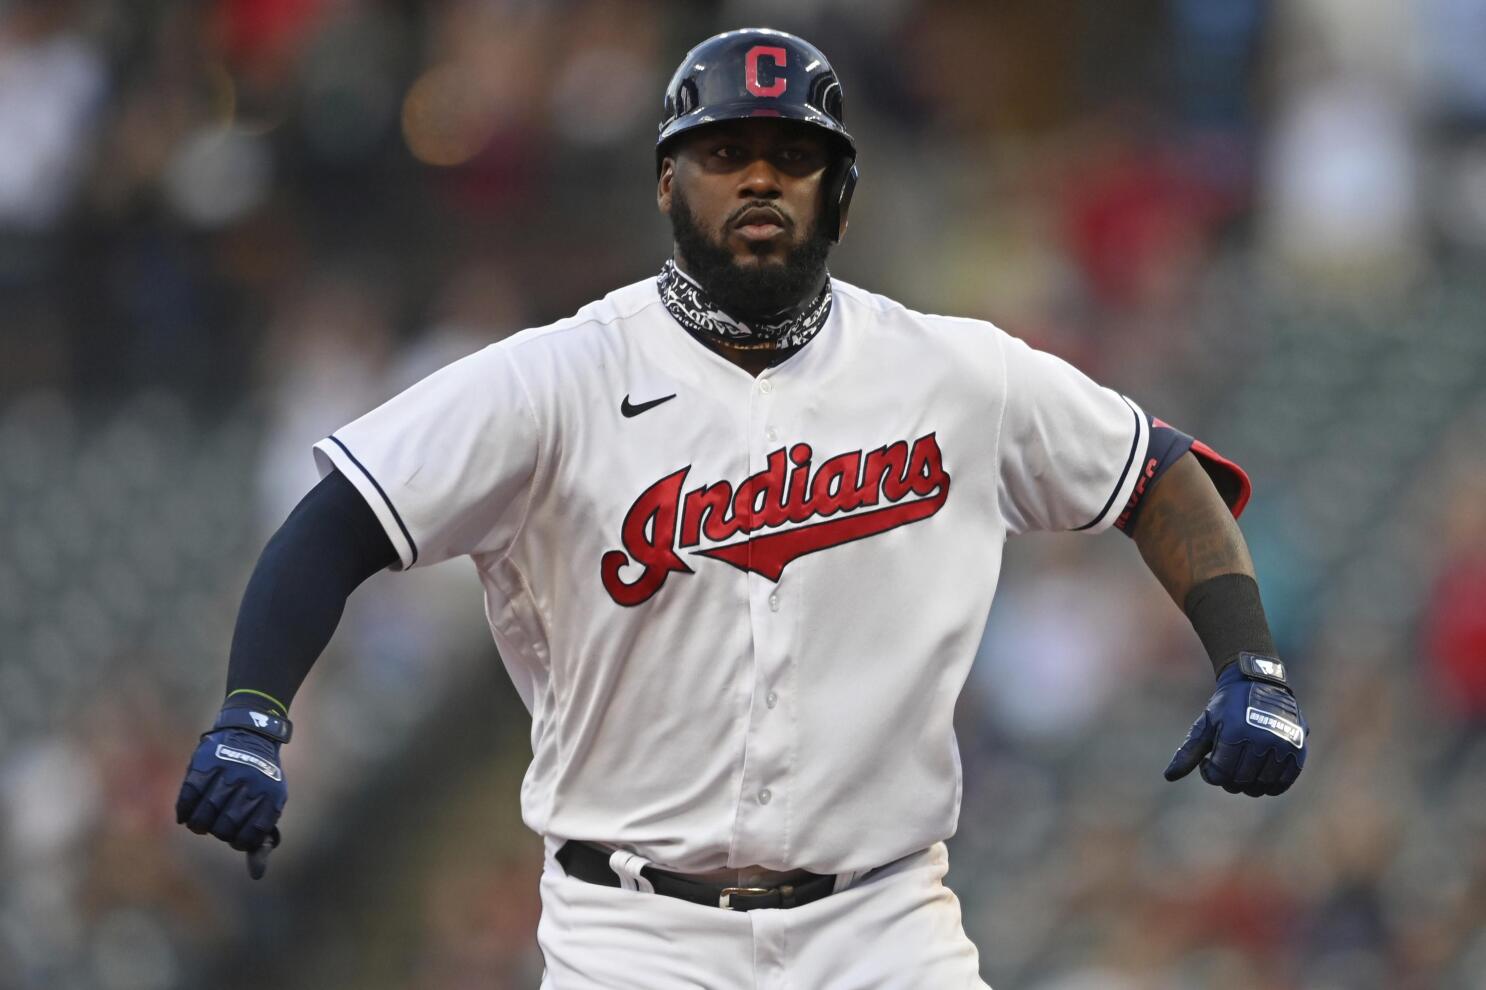 Reyes homers twice as Indians hand slumping Twins 7-4 loss